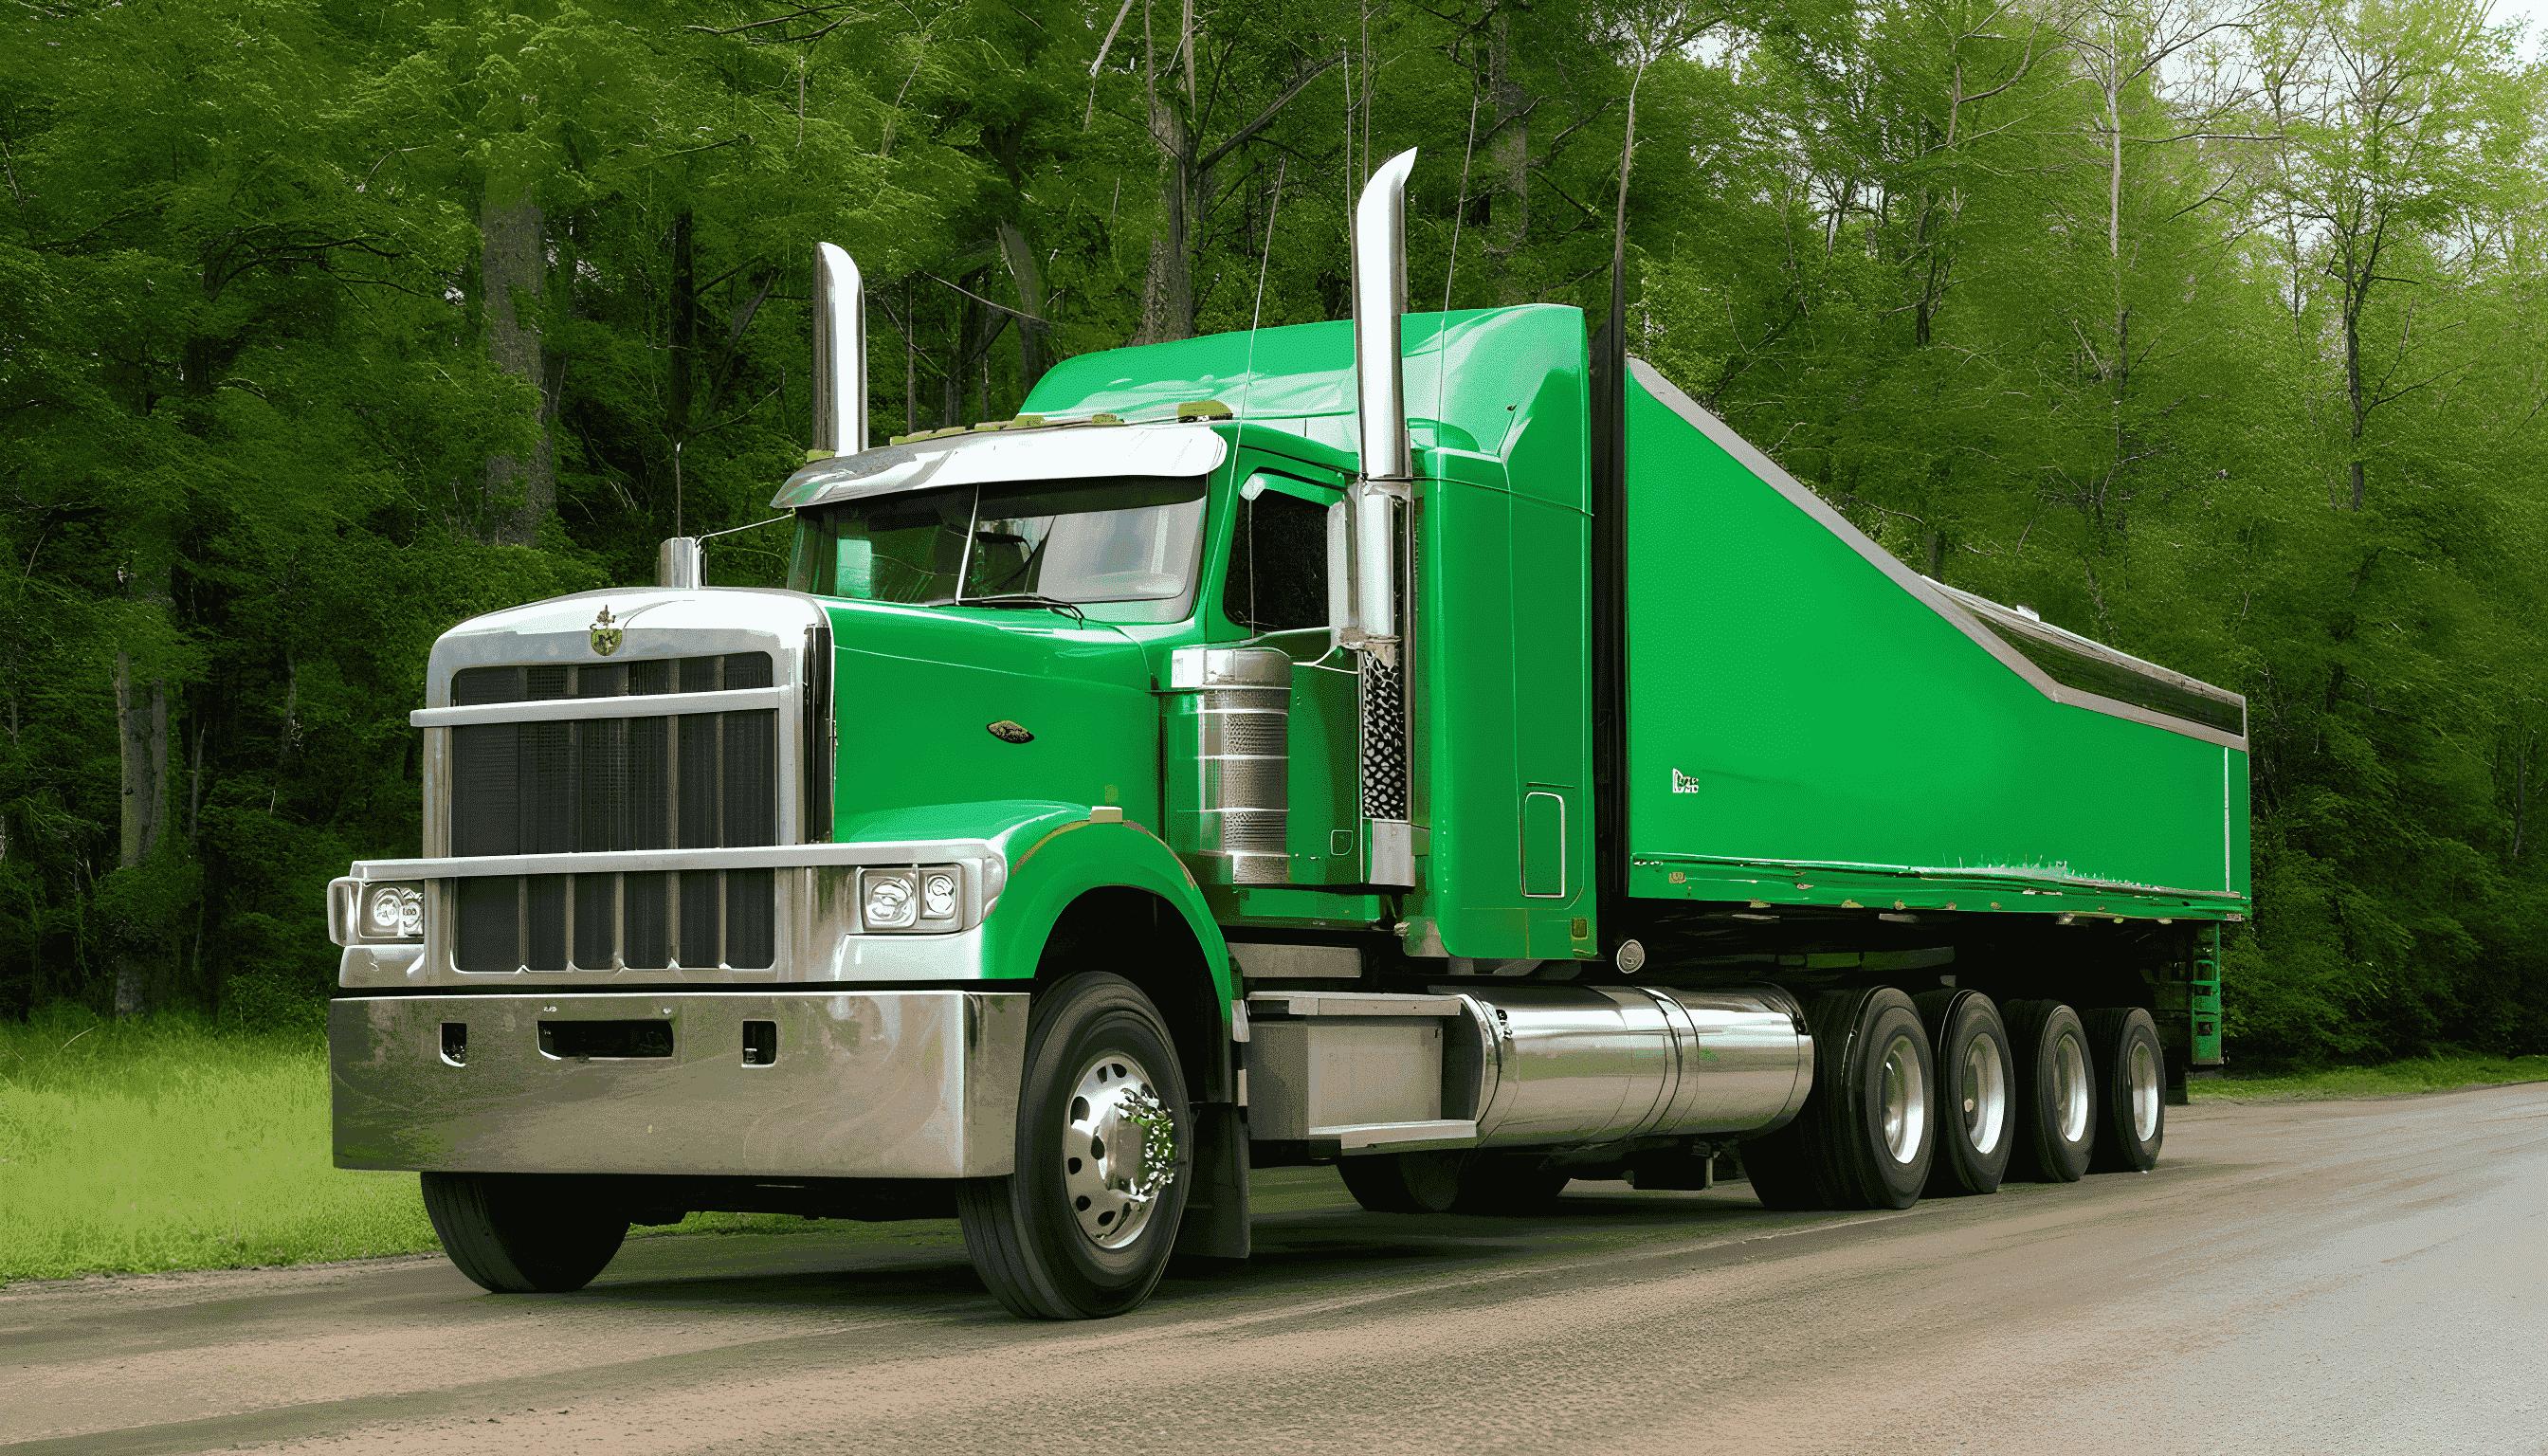 Understanding 2290: Proof of Payment for Trucking: Important Information